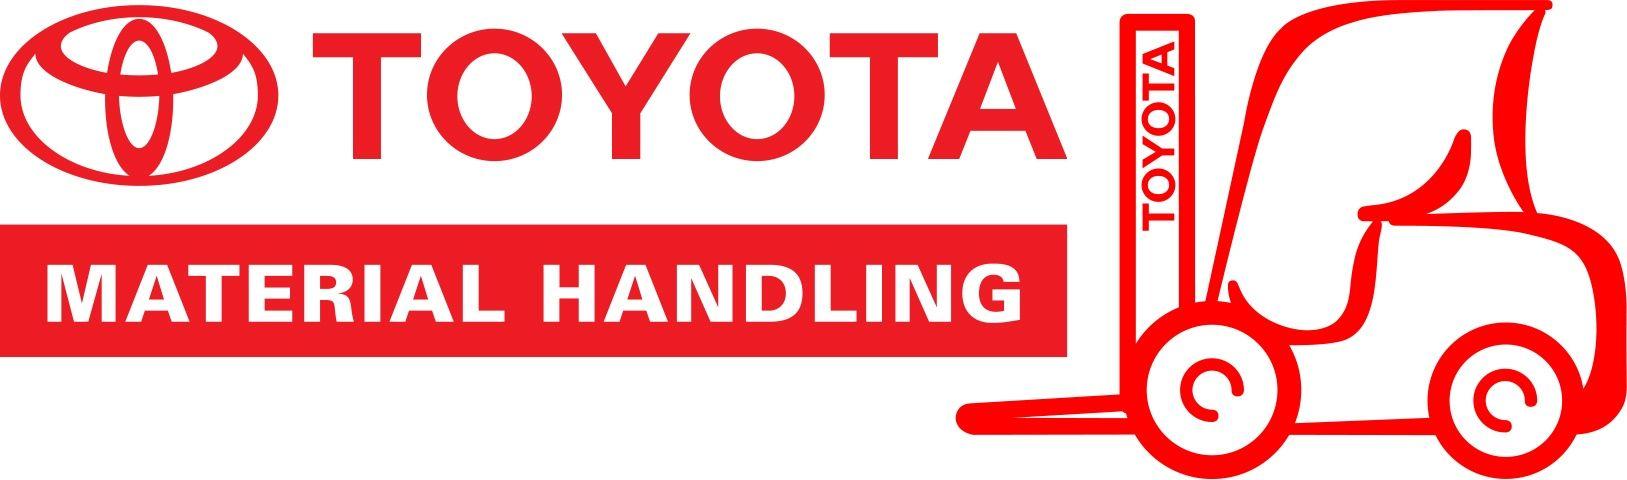 Toyota Forklift Logo - Forklift Operator of the Year Markets Limited